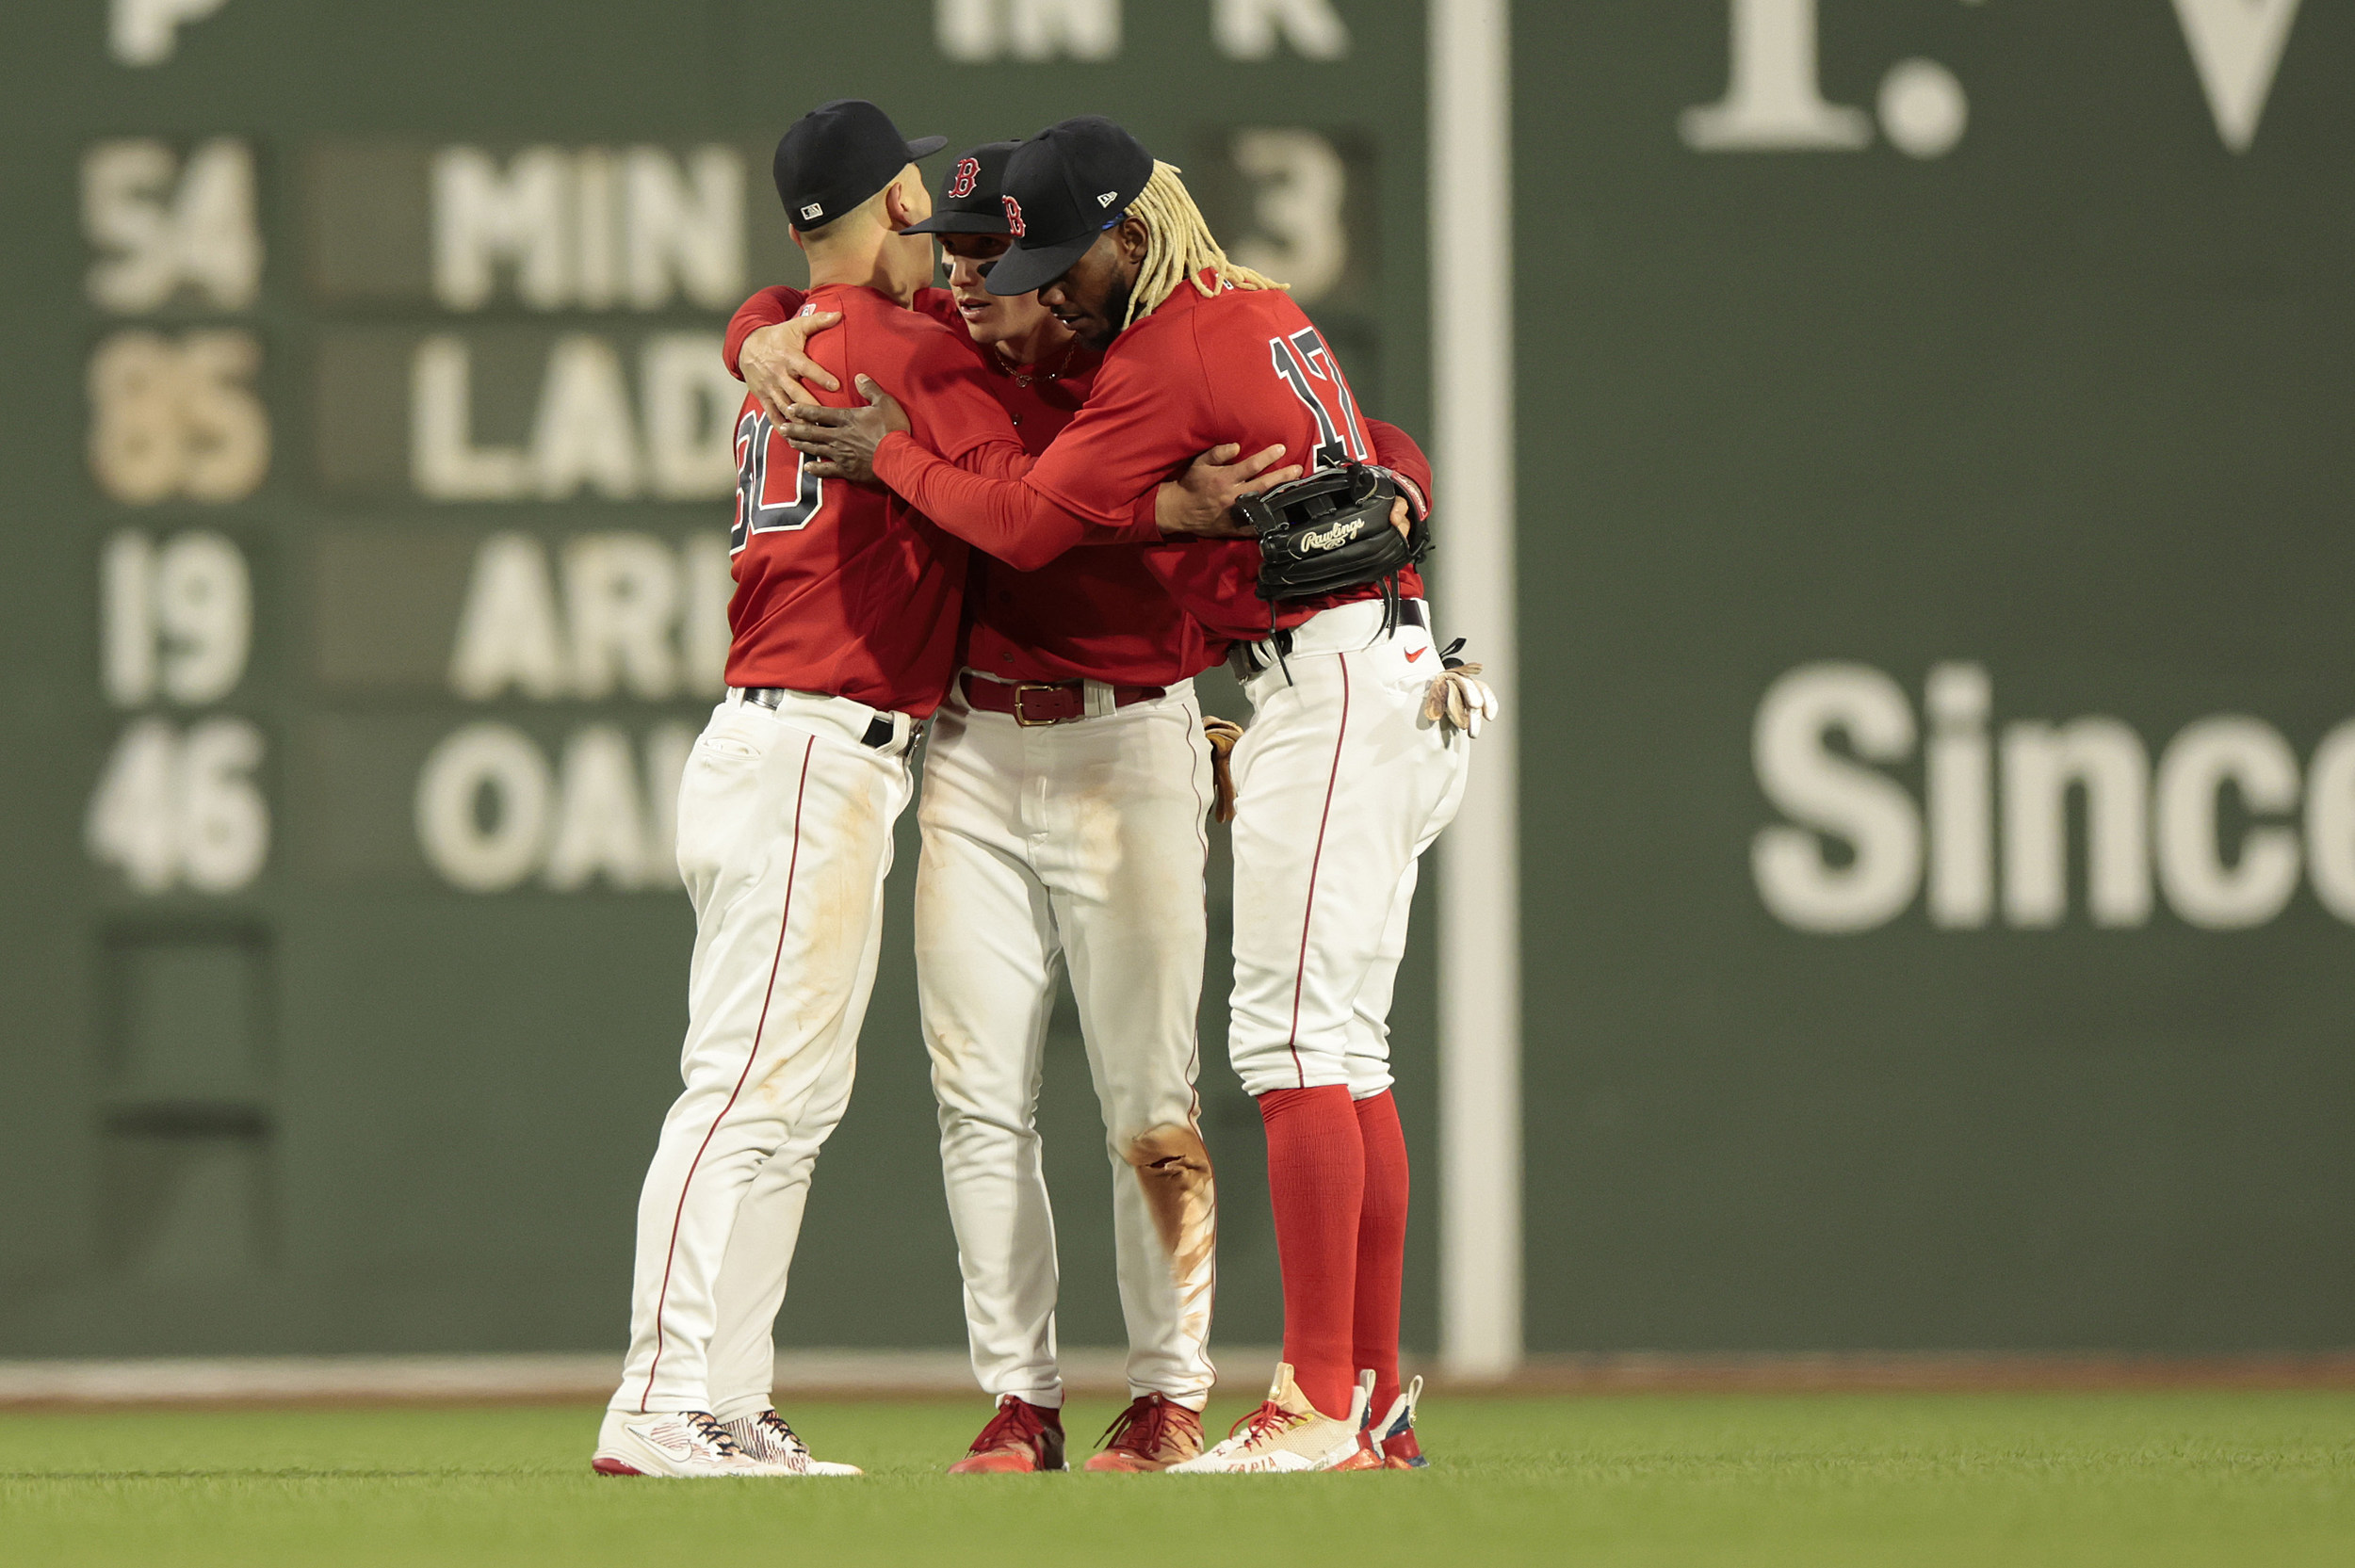 Kutter Crawford, Red Sox beat Mariners in combined one-hitter